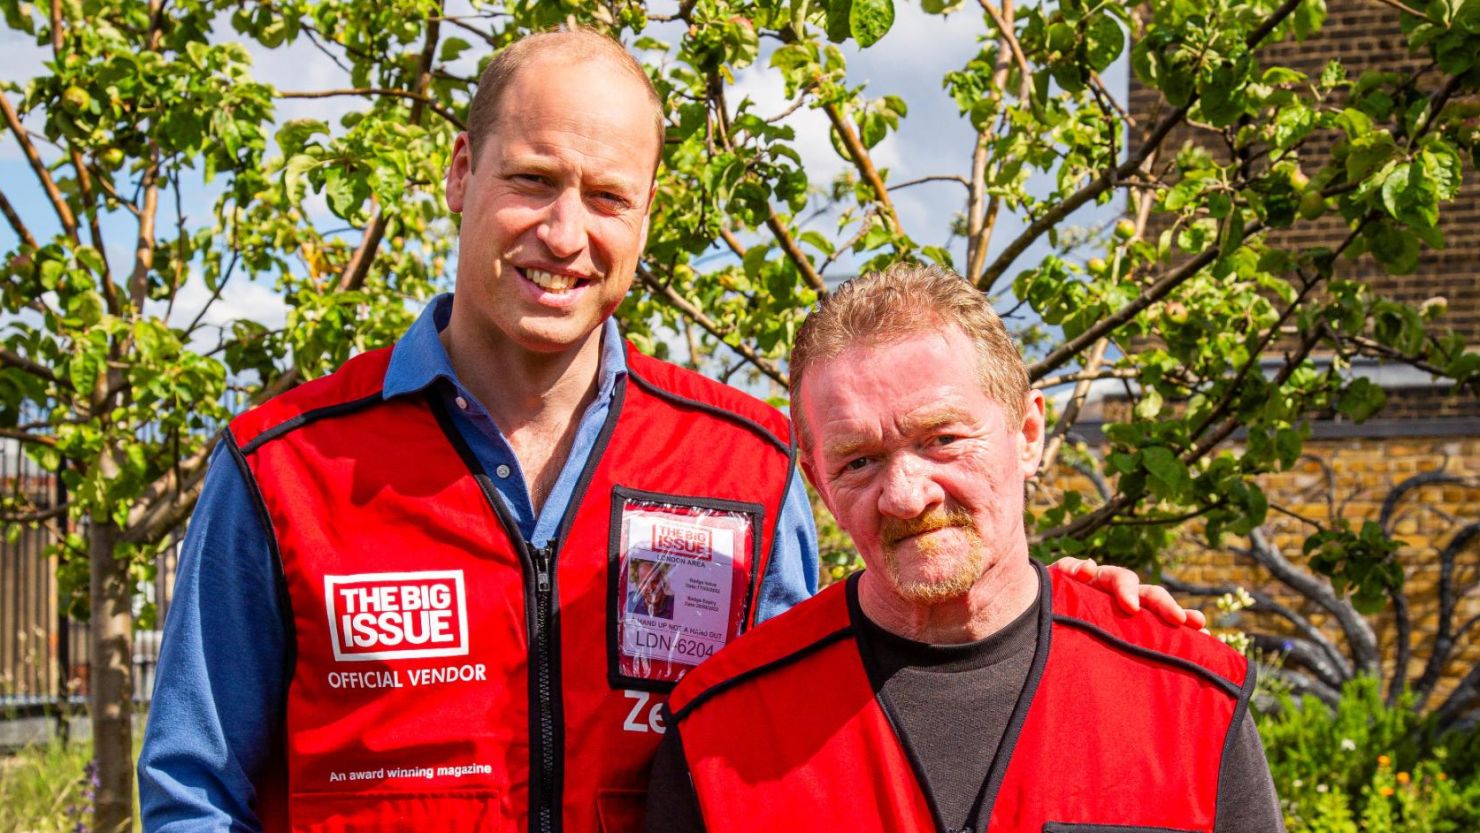 Britain's Prince William stands with Dave Martin, a vendor of The Big Issue magazine.